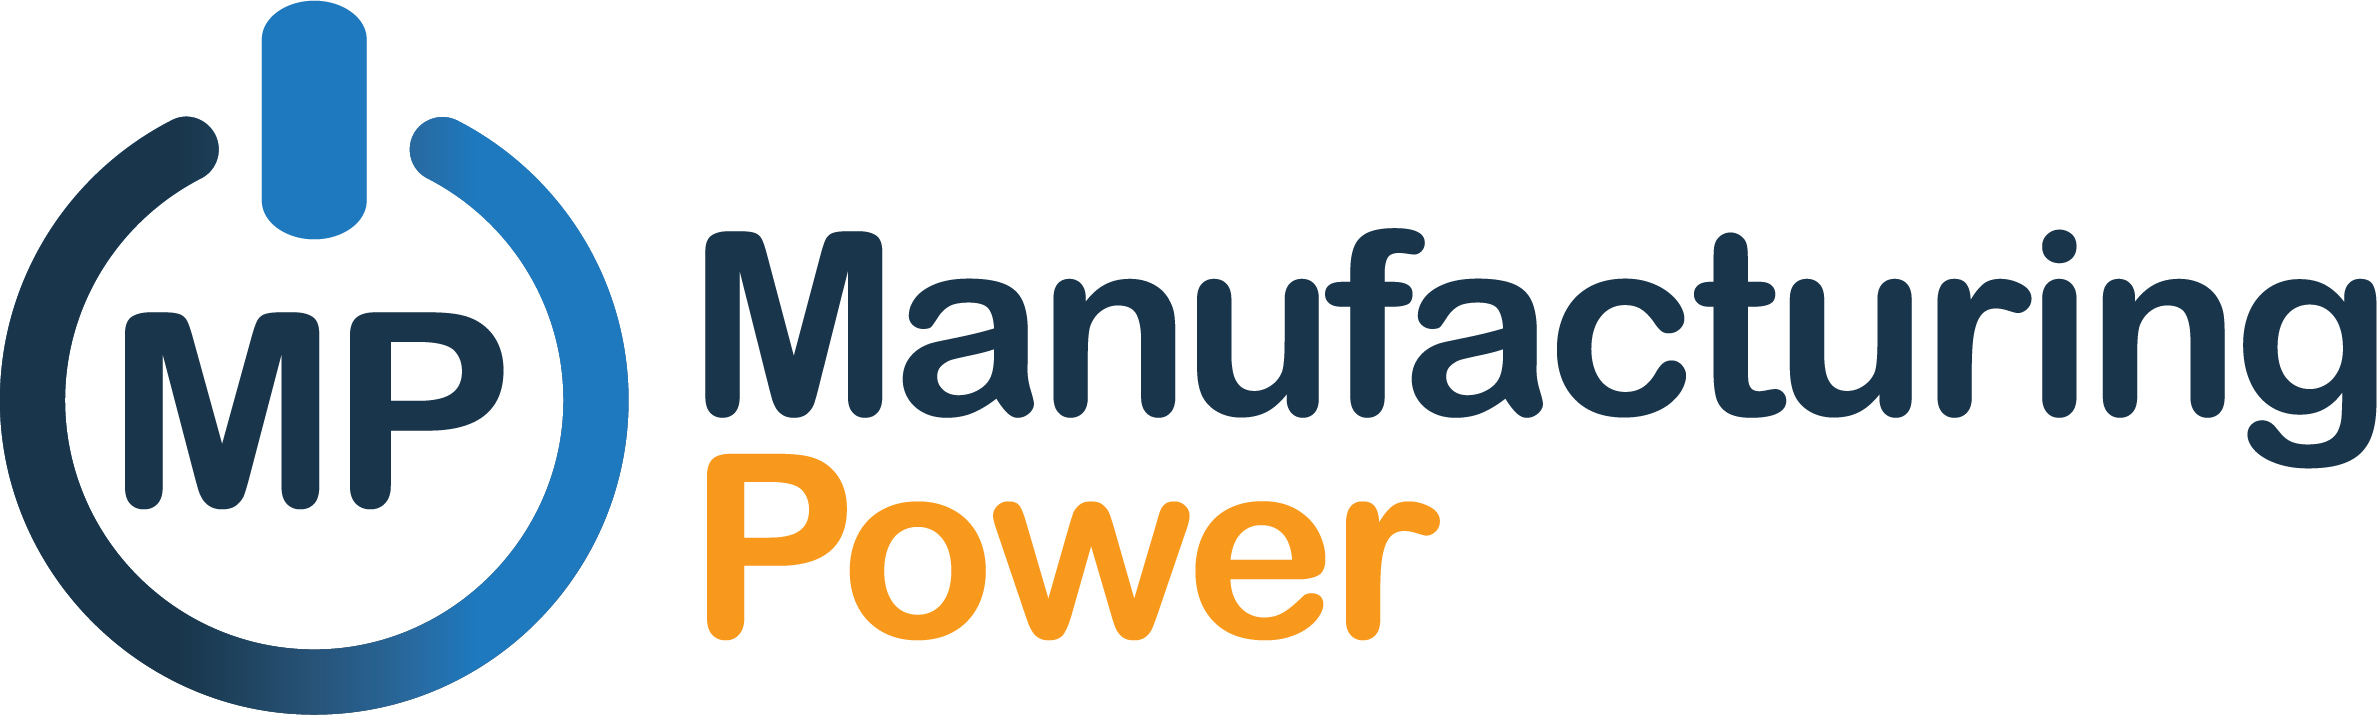 ManufacturingPower Video Attracts 5000 Views Talking Competitive Pricing Technology for Small and Mid-Sized Manufacturers 